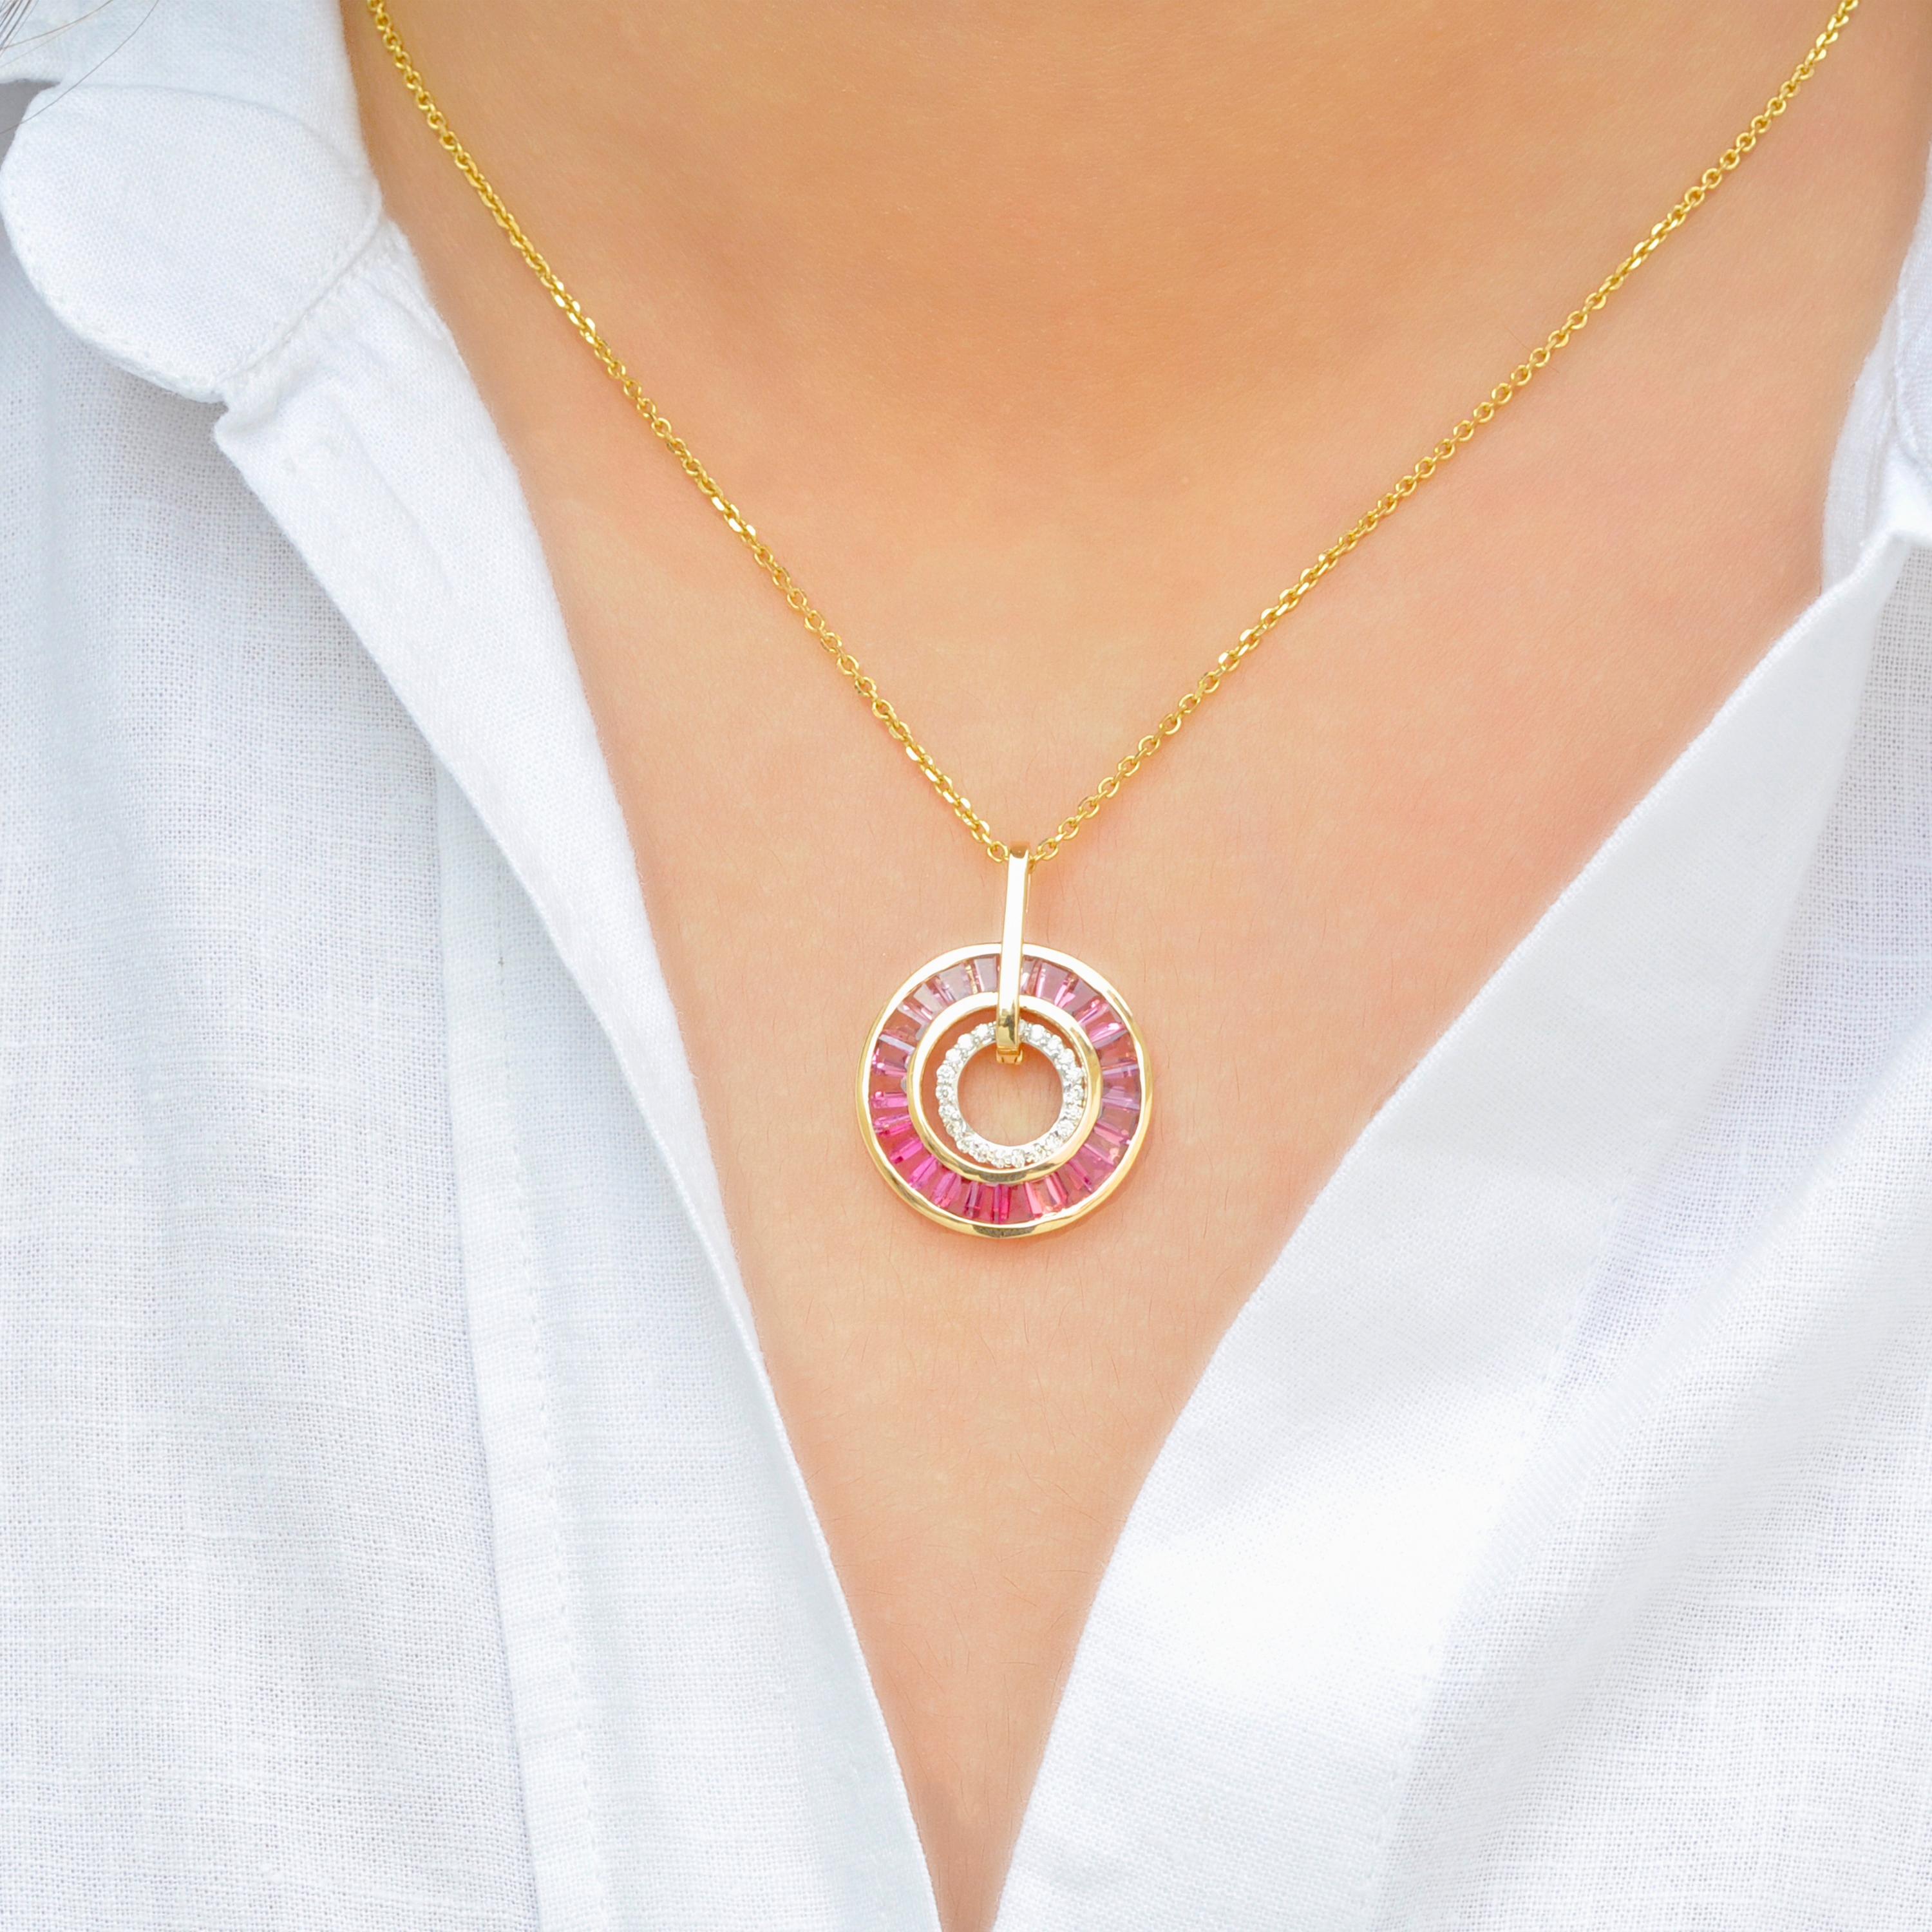 18k gold pink tourmaline taper baguettes diamond circle art deco pendant necklace

This 18 karat gold stunning pendant is a mesmerizing blend of sophistication and grace, where lustrous pink tourmalines are circularly complimented with brilliant cut